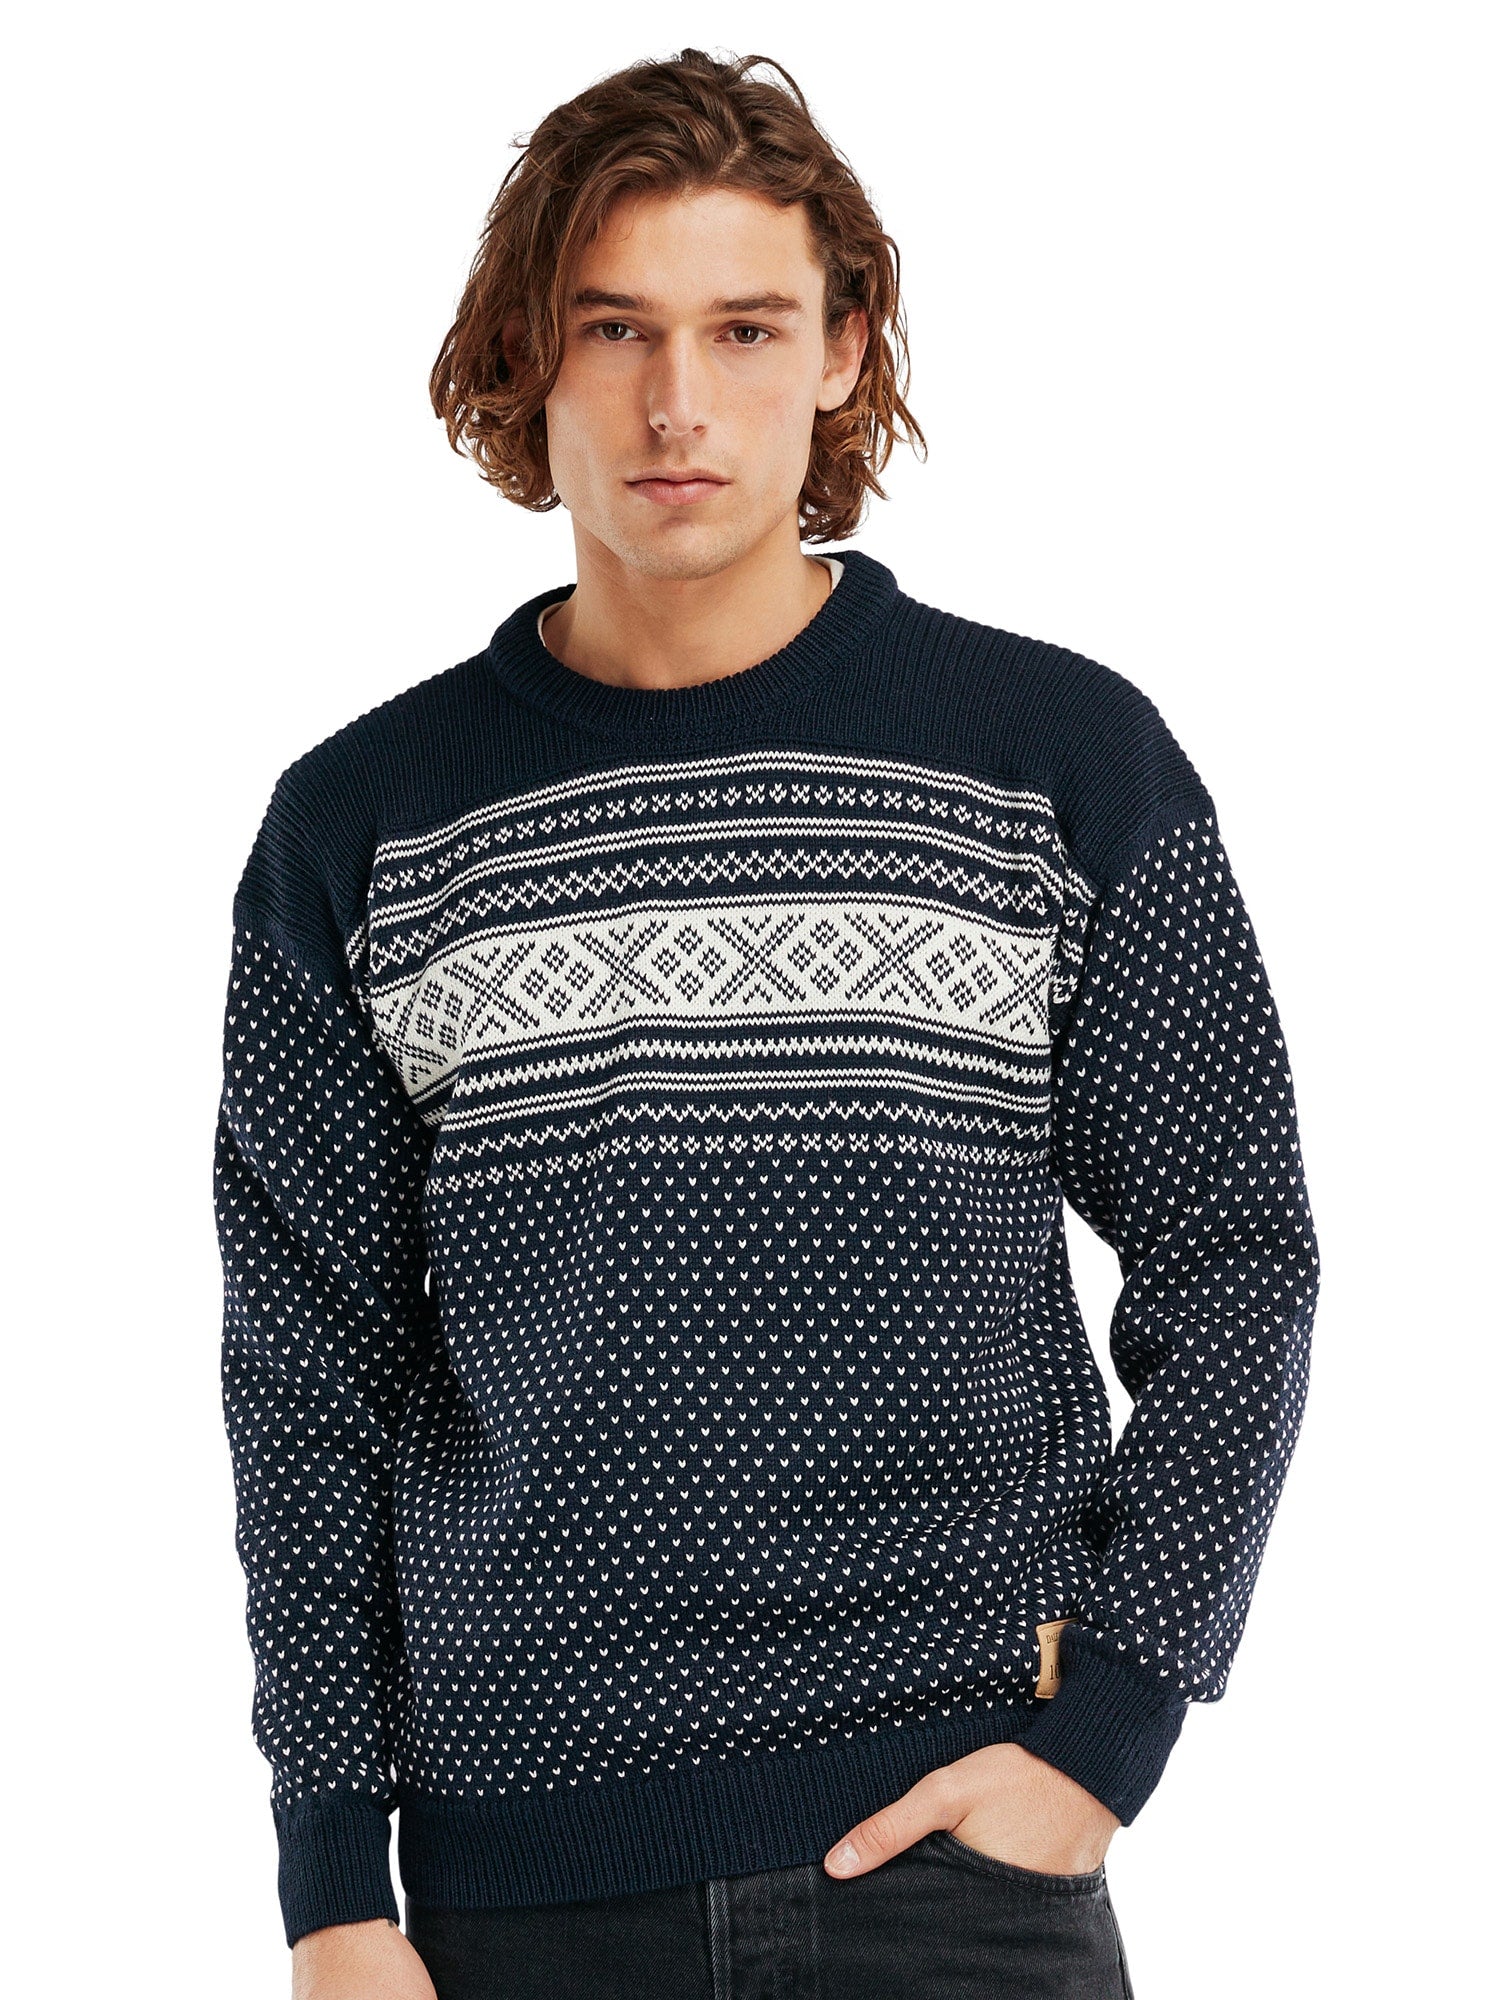 Dale of Norway Men's Valloy Wool Sweater